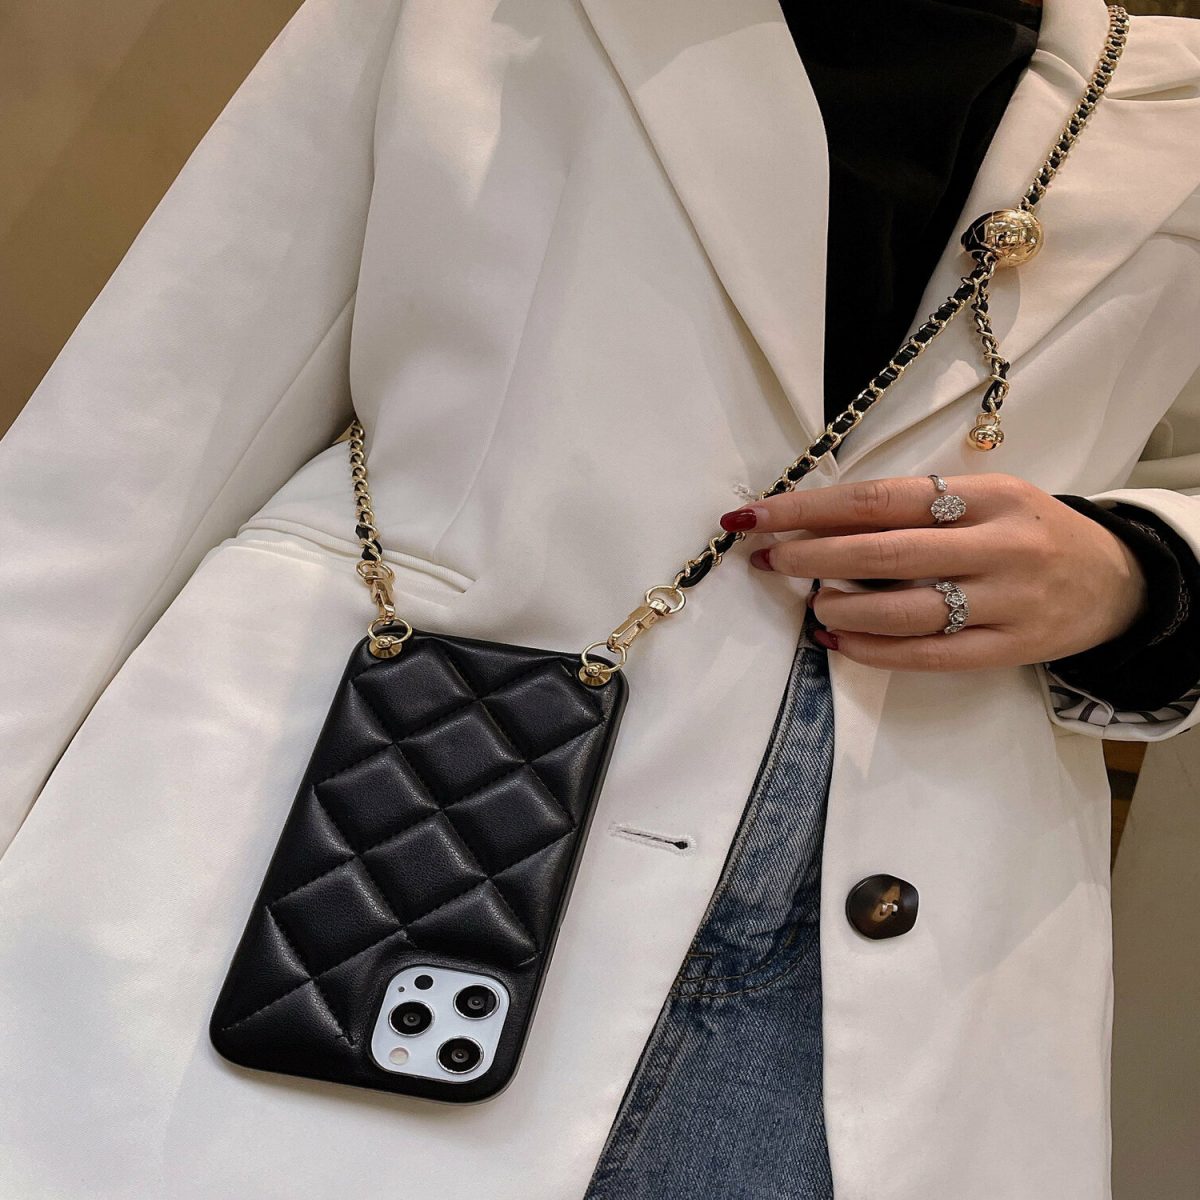 Get the best deals on CHANEL Cell Phone Cases, Covers & Skins for